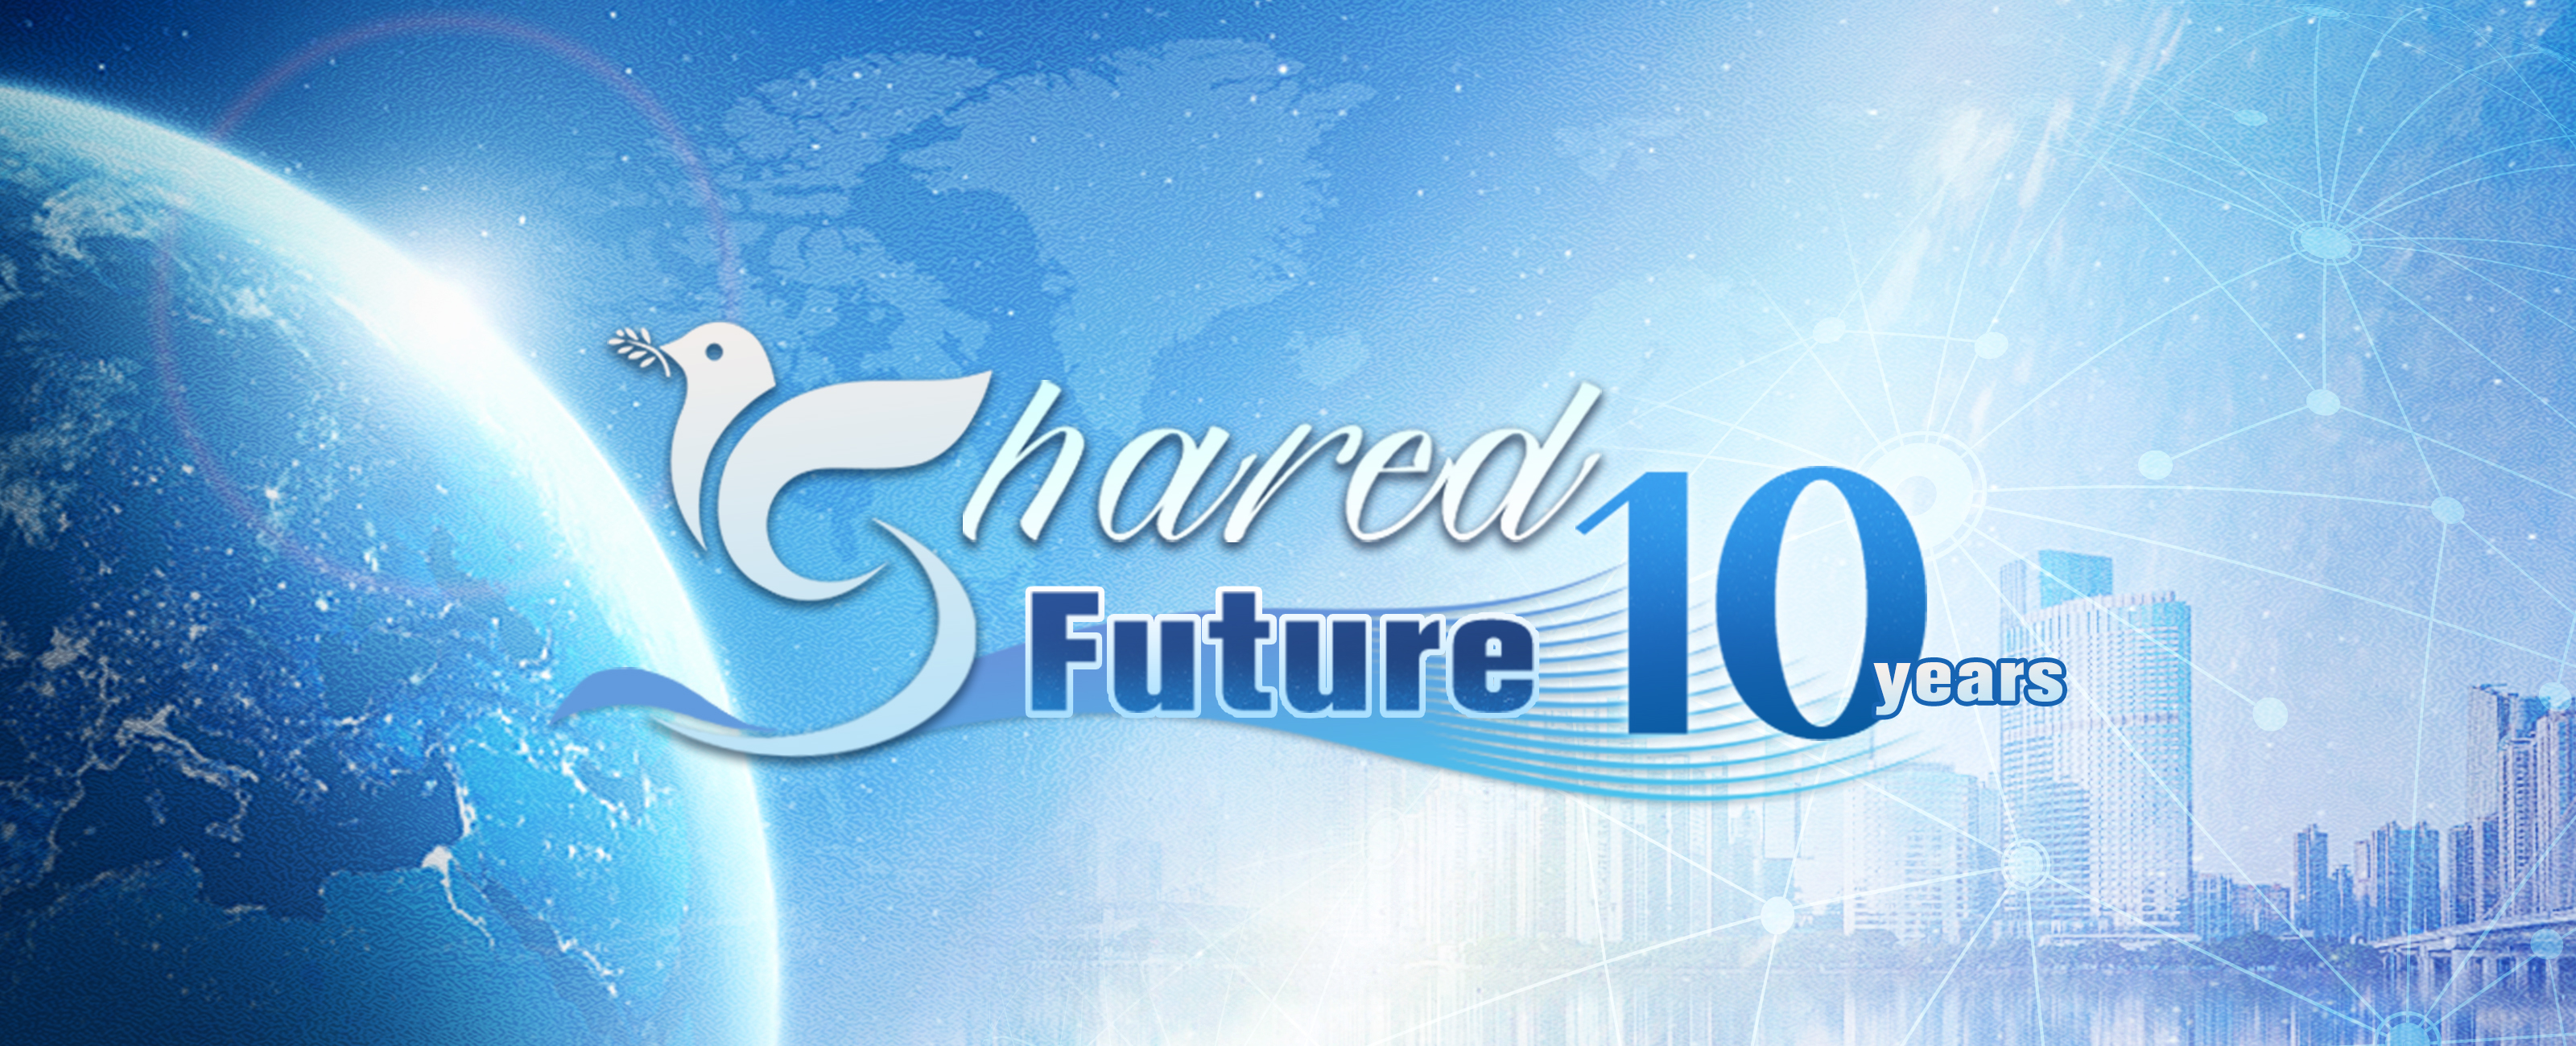 banner for the report of shared future 10 years